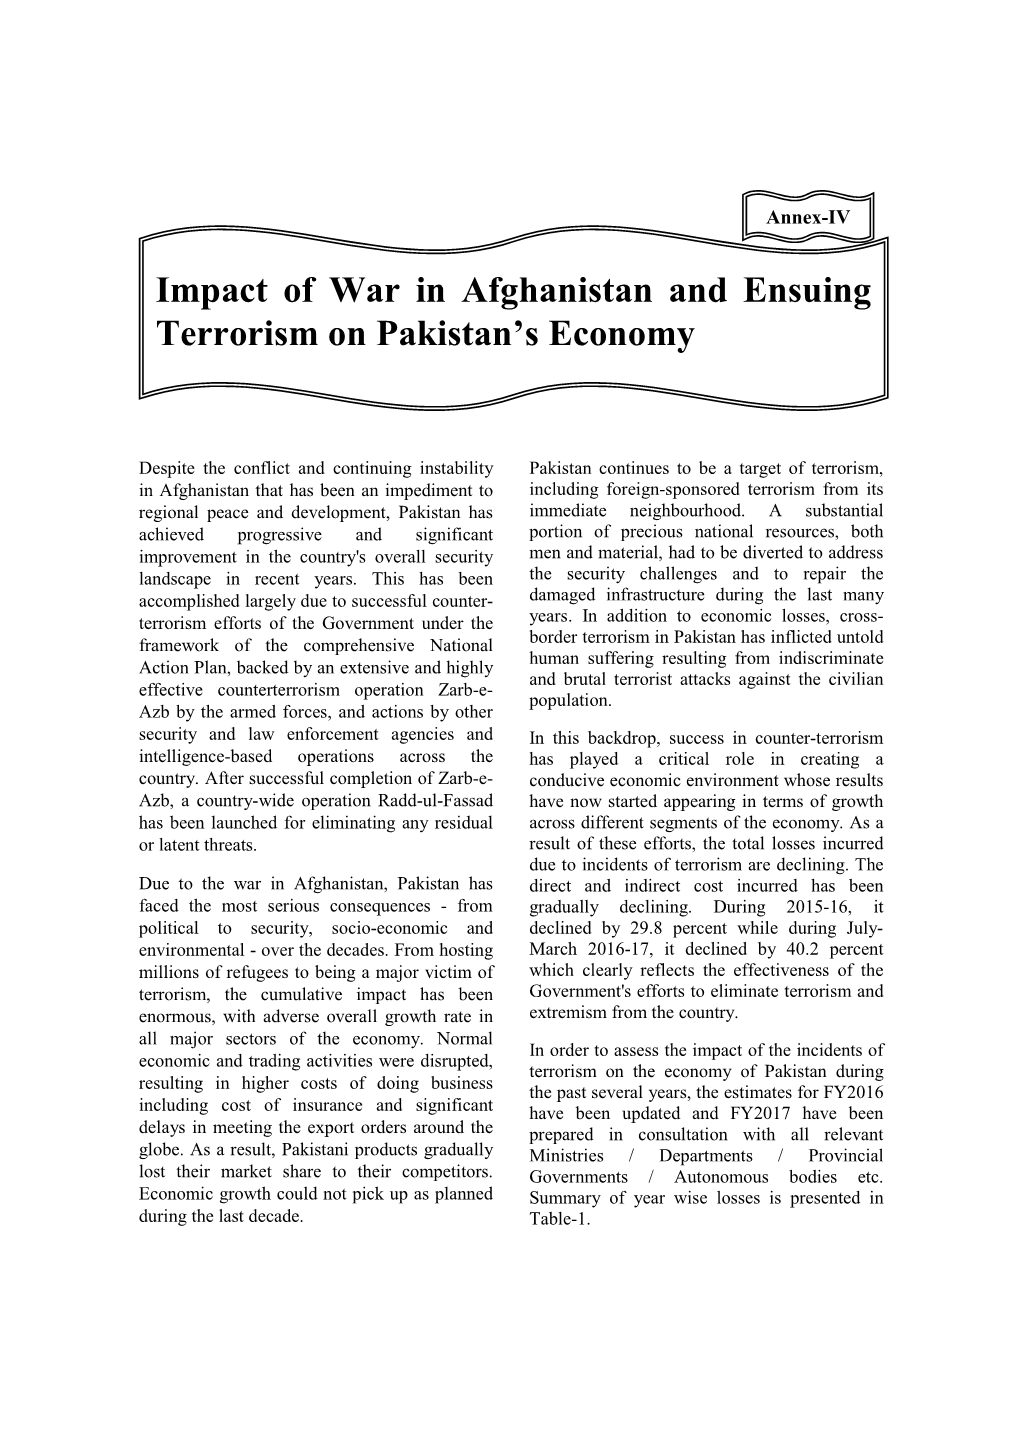 Impact of War in Afghanistan and Ensuing Terrorism on Pakistan's